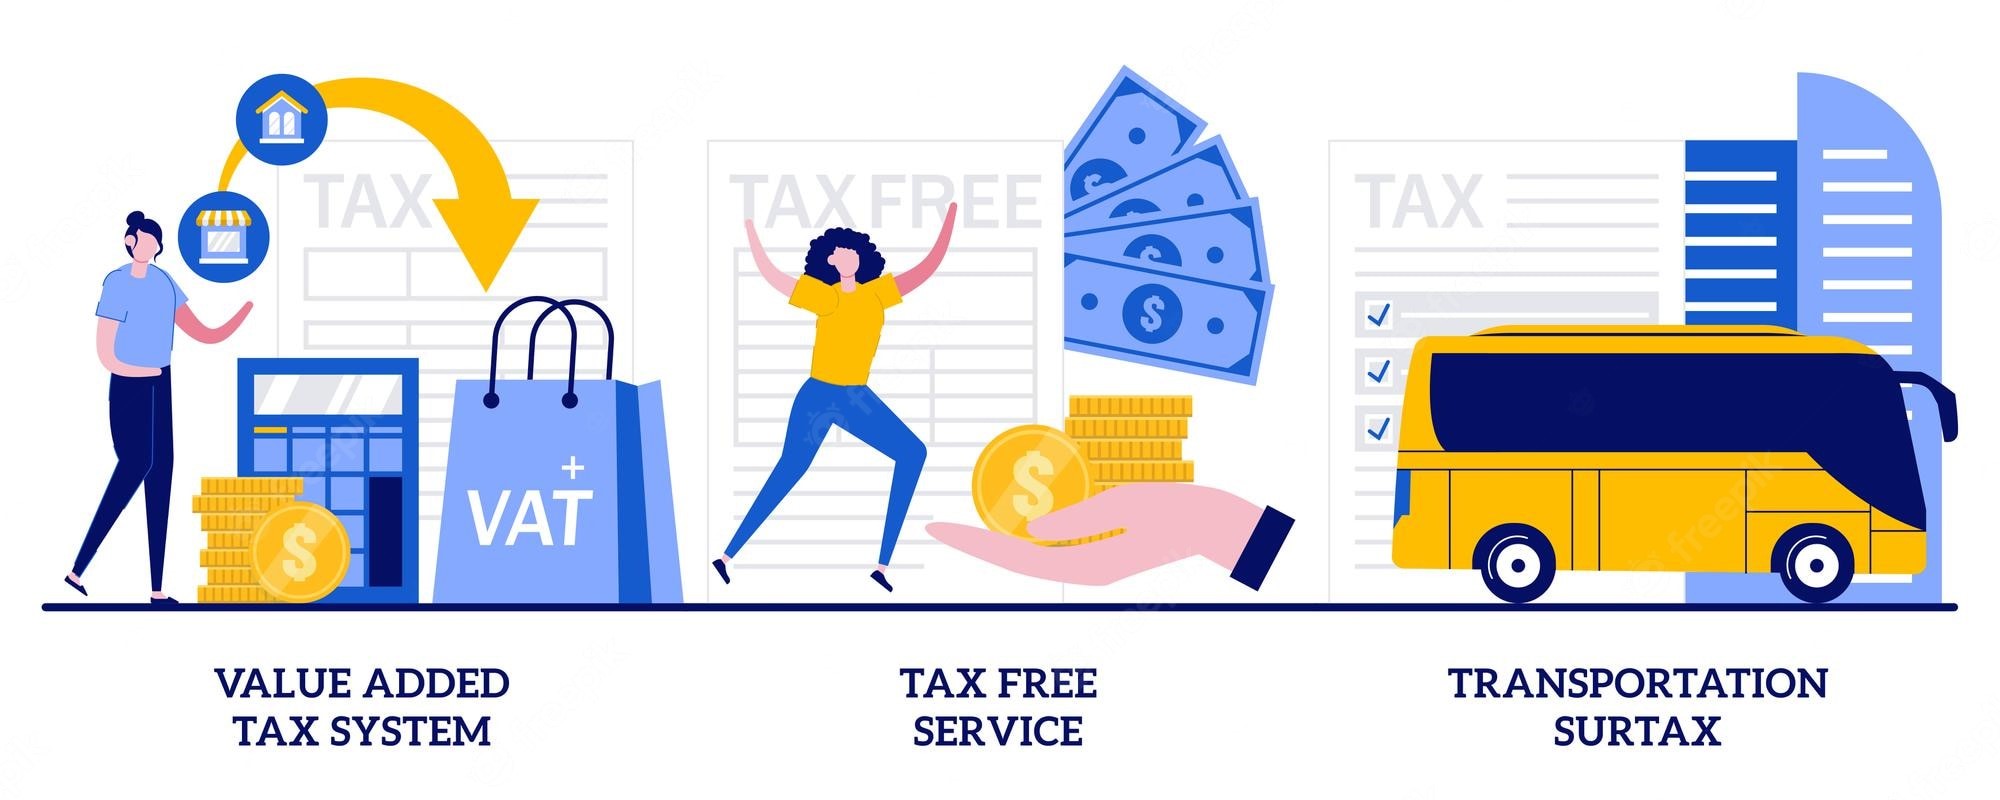 Tax Structure for Your Business